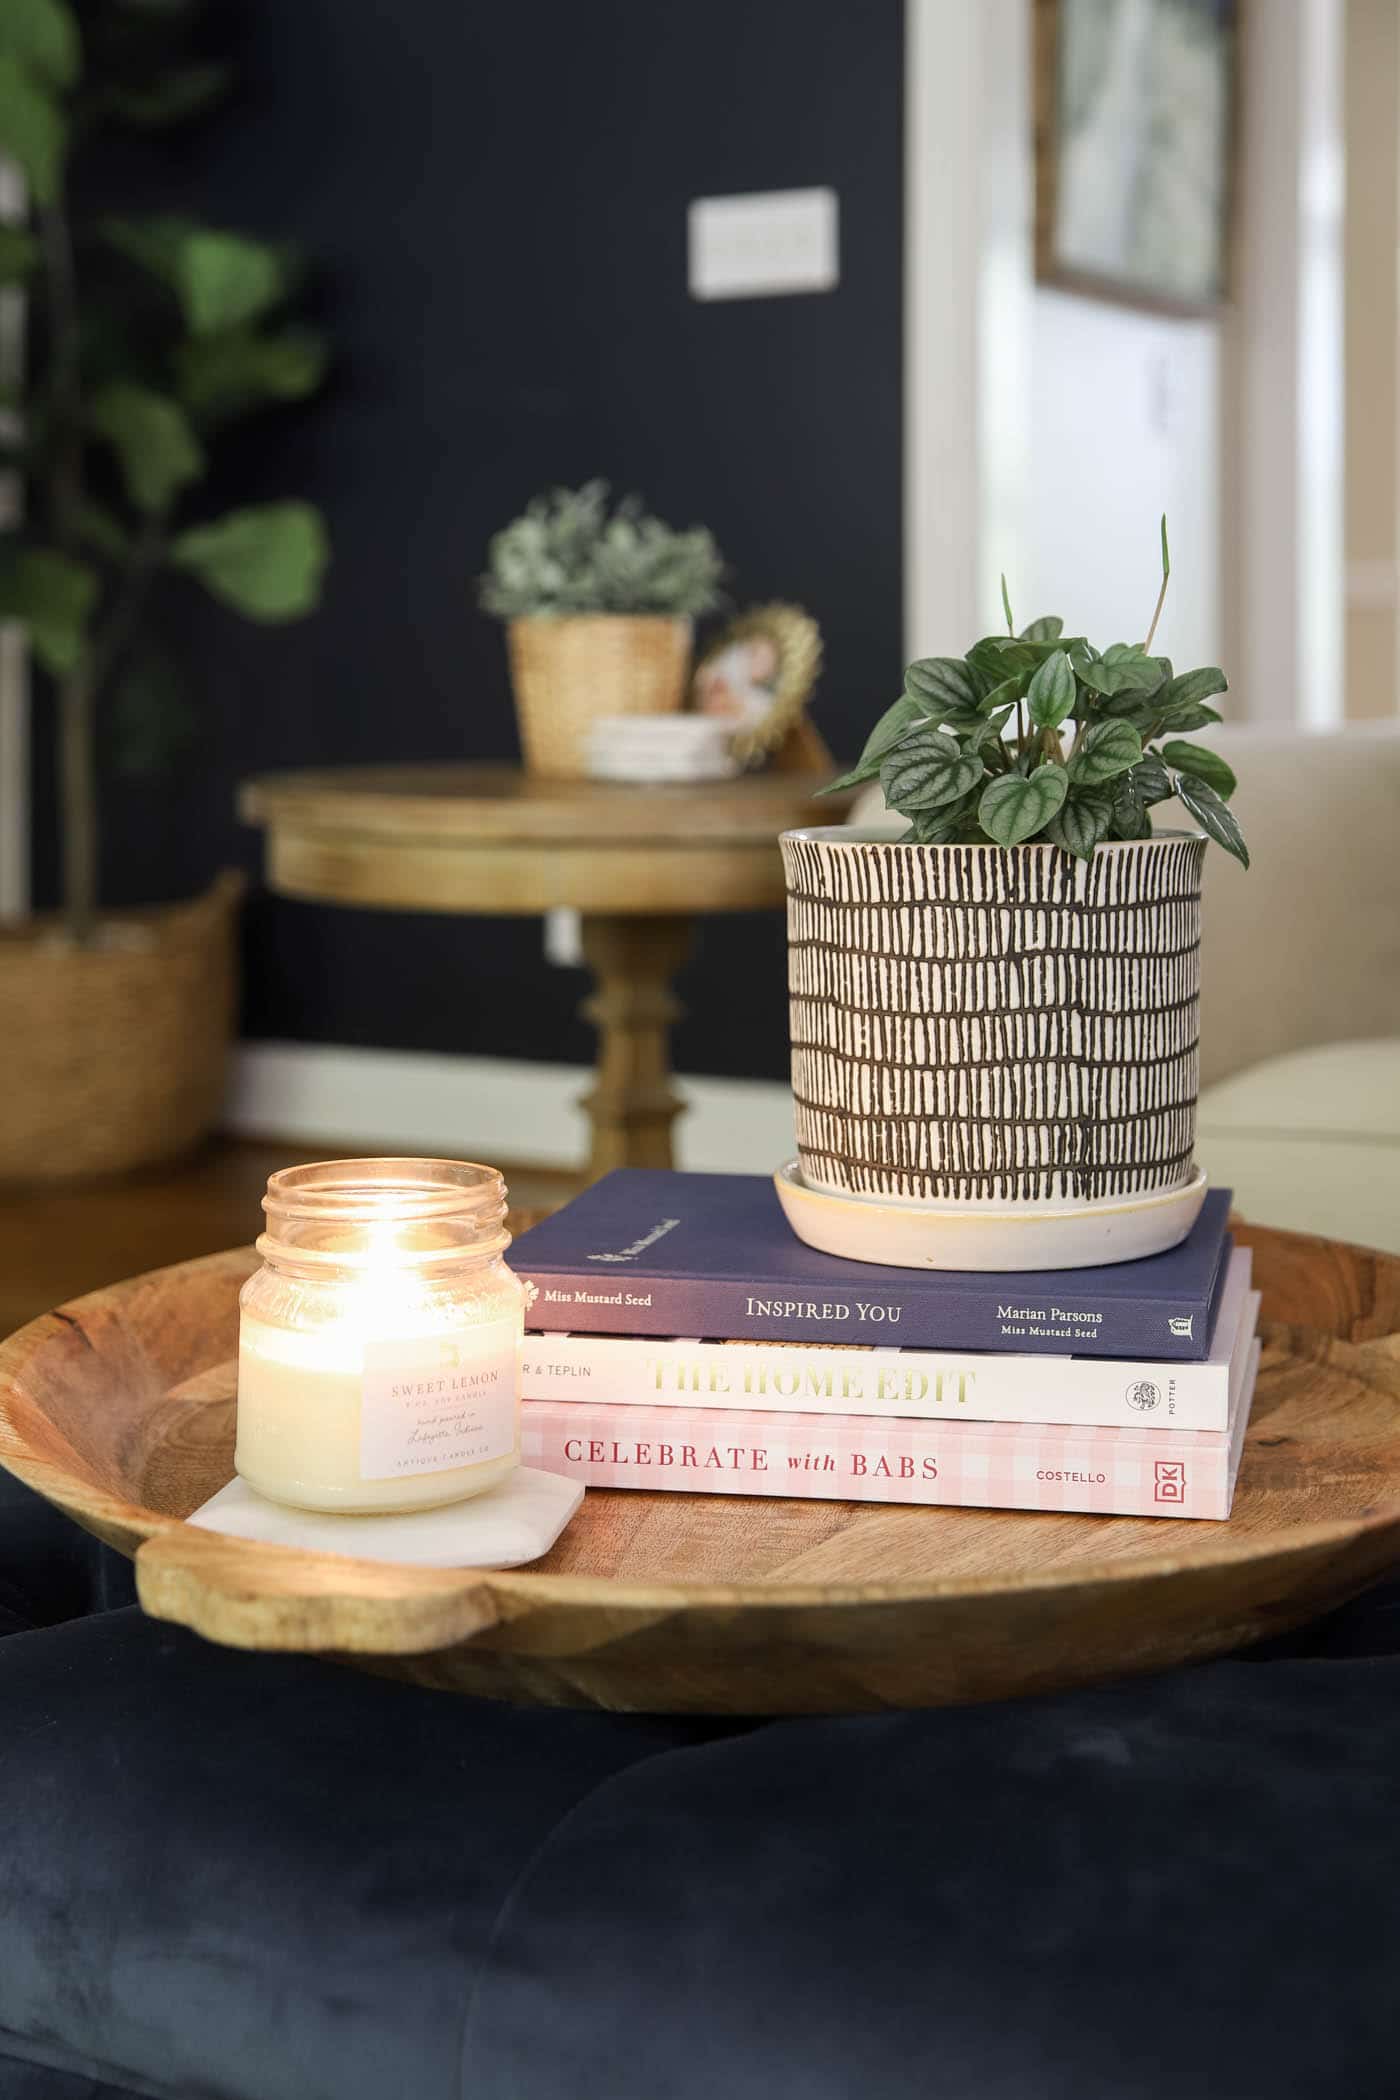 Easy Coffee Table Decor Ideas and How to Style Them - Bless'er House